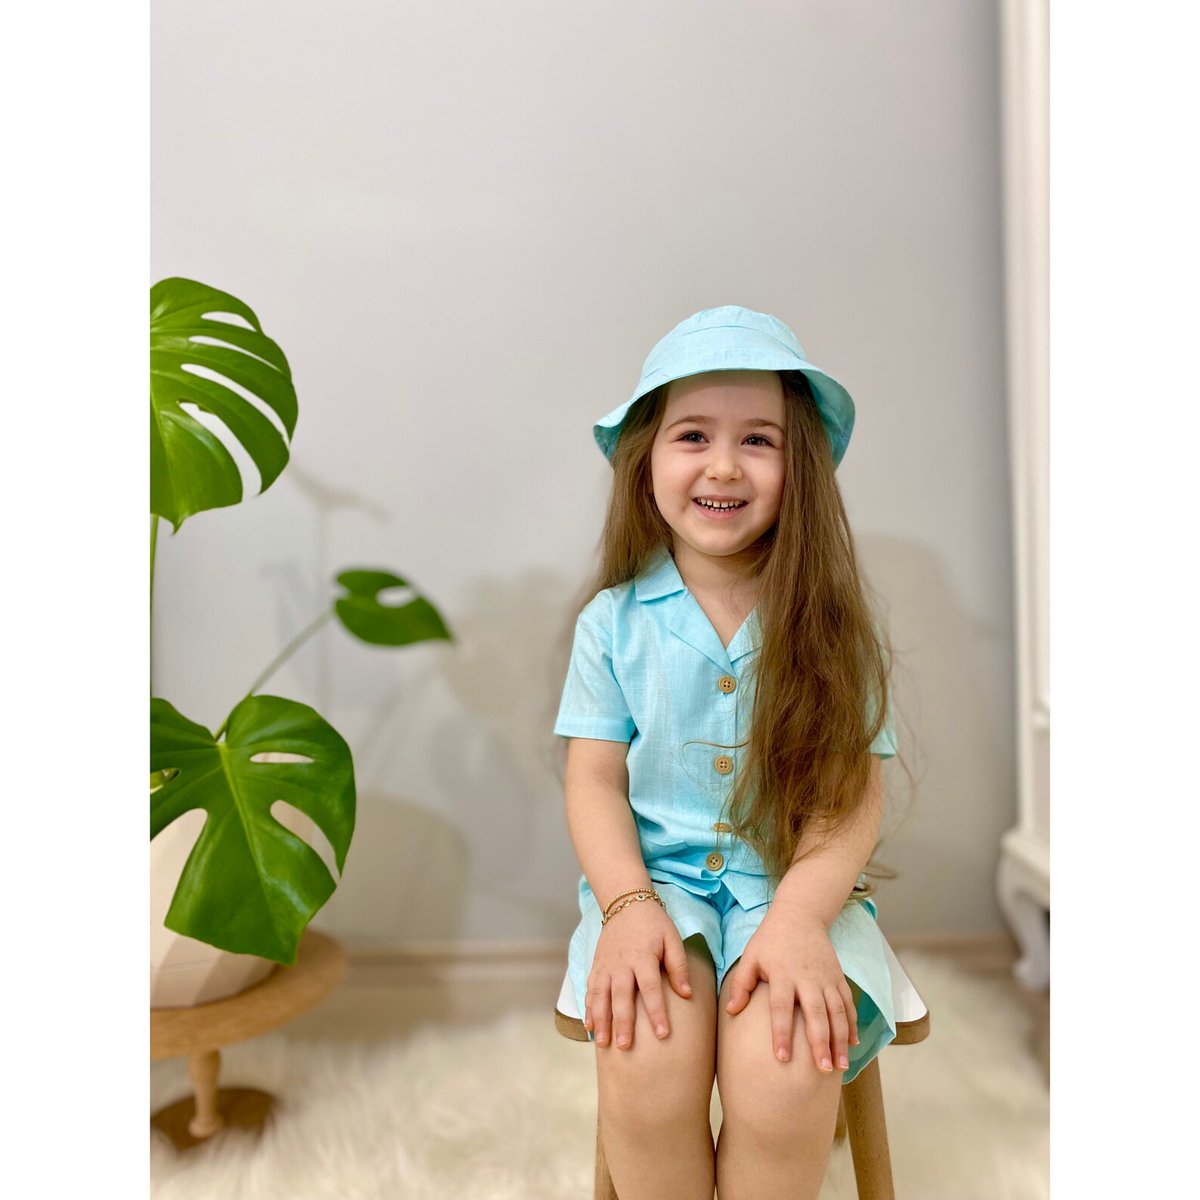 3Pcs Toddler Boy Shirt Shorts and Hat Set

Etsy Link : t.ly/ehyO-

#ToddlerOutfit #GenderNeutral #ToddlerClothing #ToddlerClothingSet #ToddlerShirt #ToddlerShorts #PhotoOutfit #SummerOutfit #BeachOutfit #BohoOutfit #CuteToddlerOutfit #ToddlerGift #KidsGift